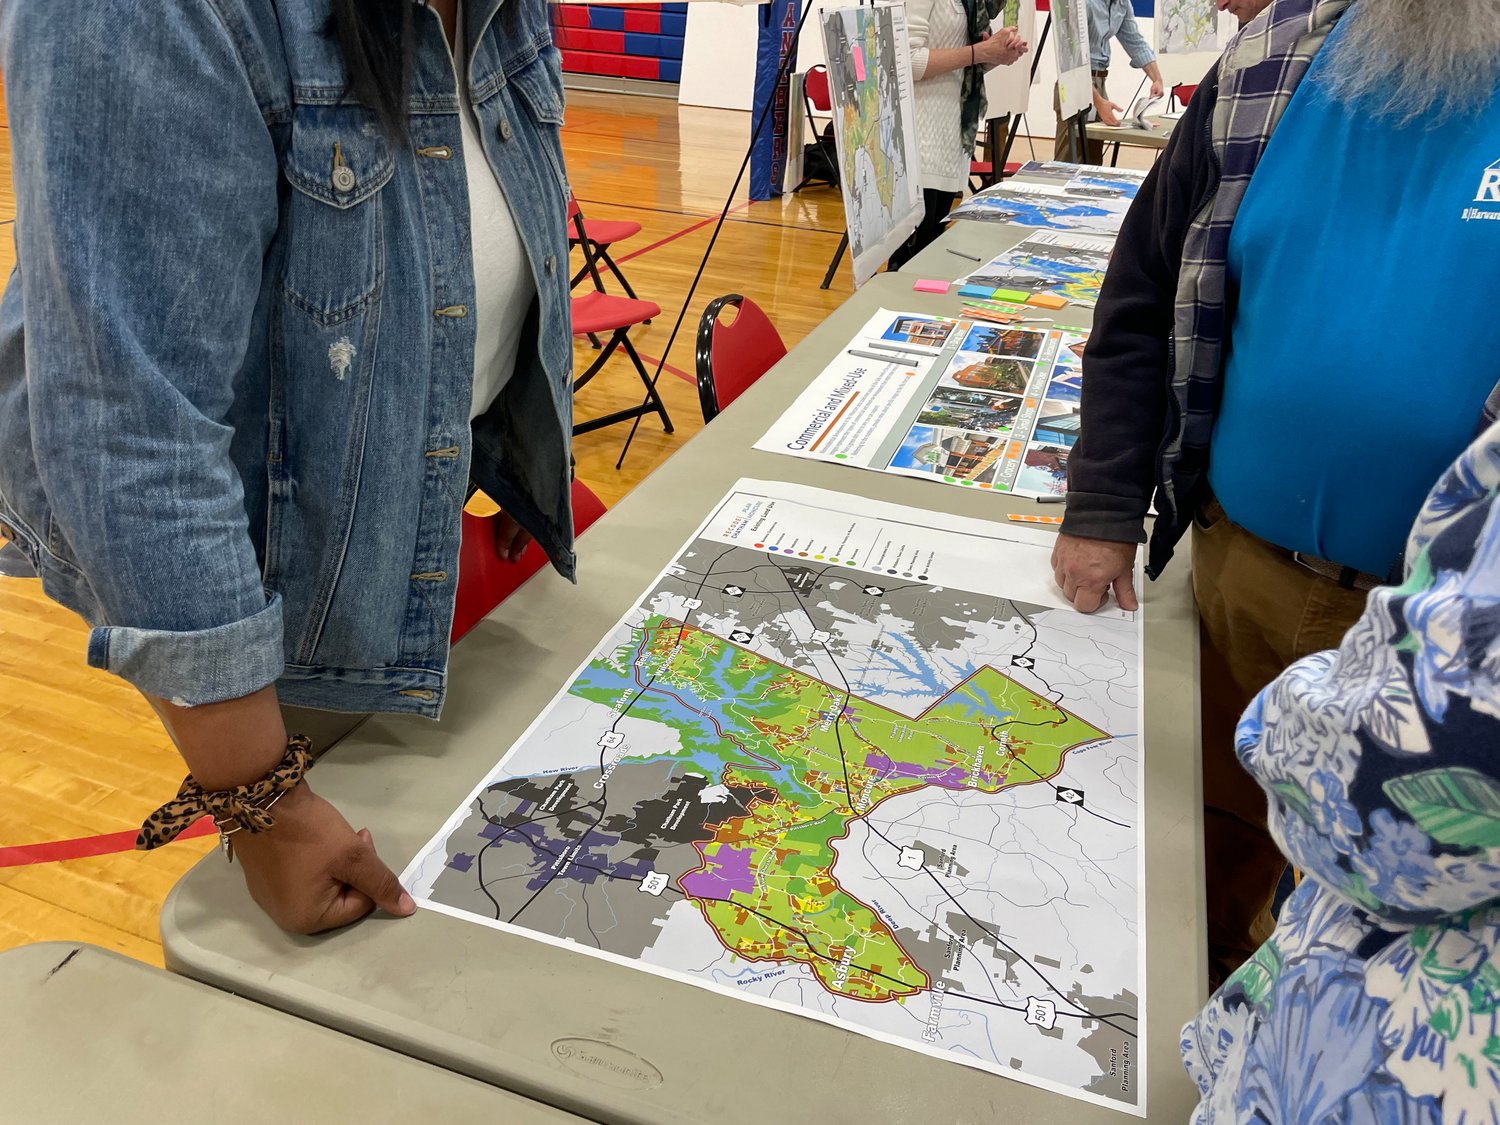 Maps on display at a community input session for Plan Moncure at Moncure School on Tuesday show zoning codes, stormwater management and housing types in the current Moncure area.